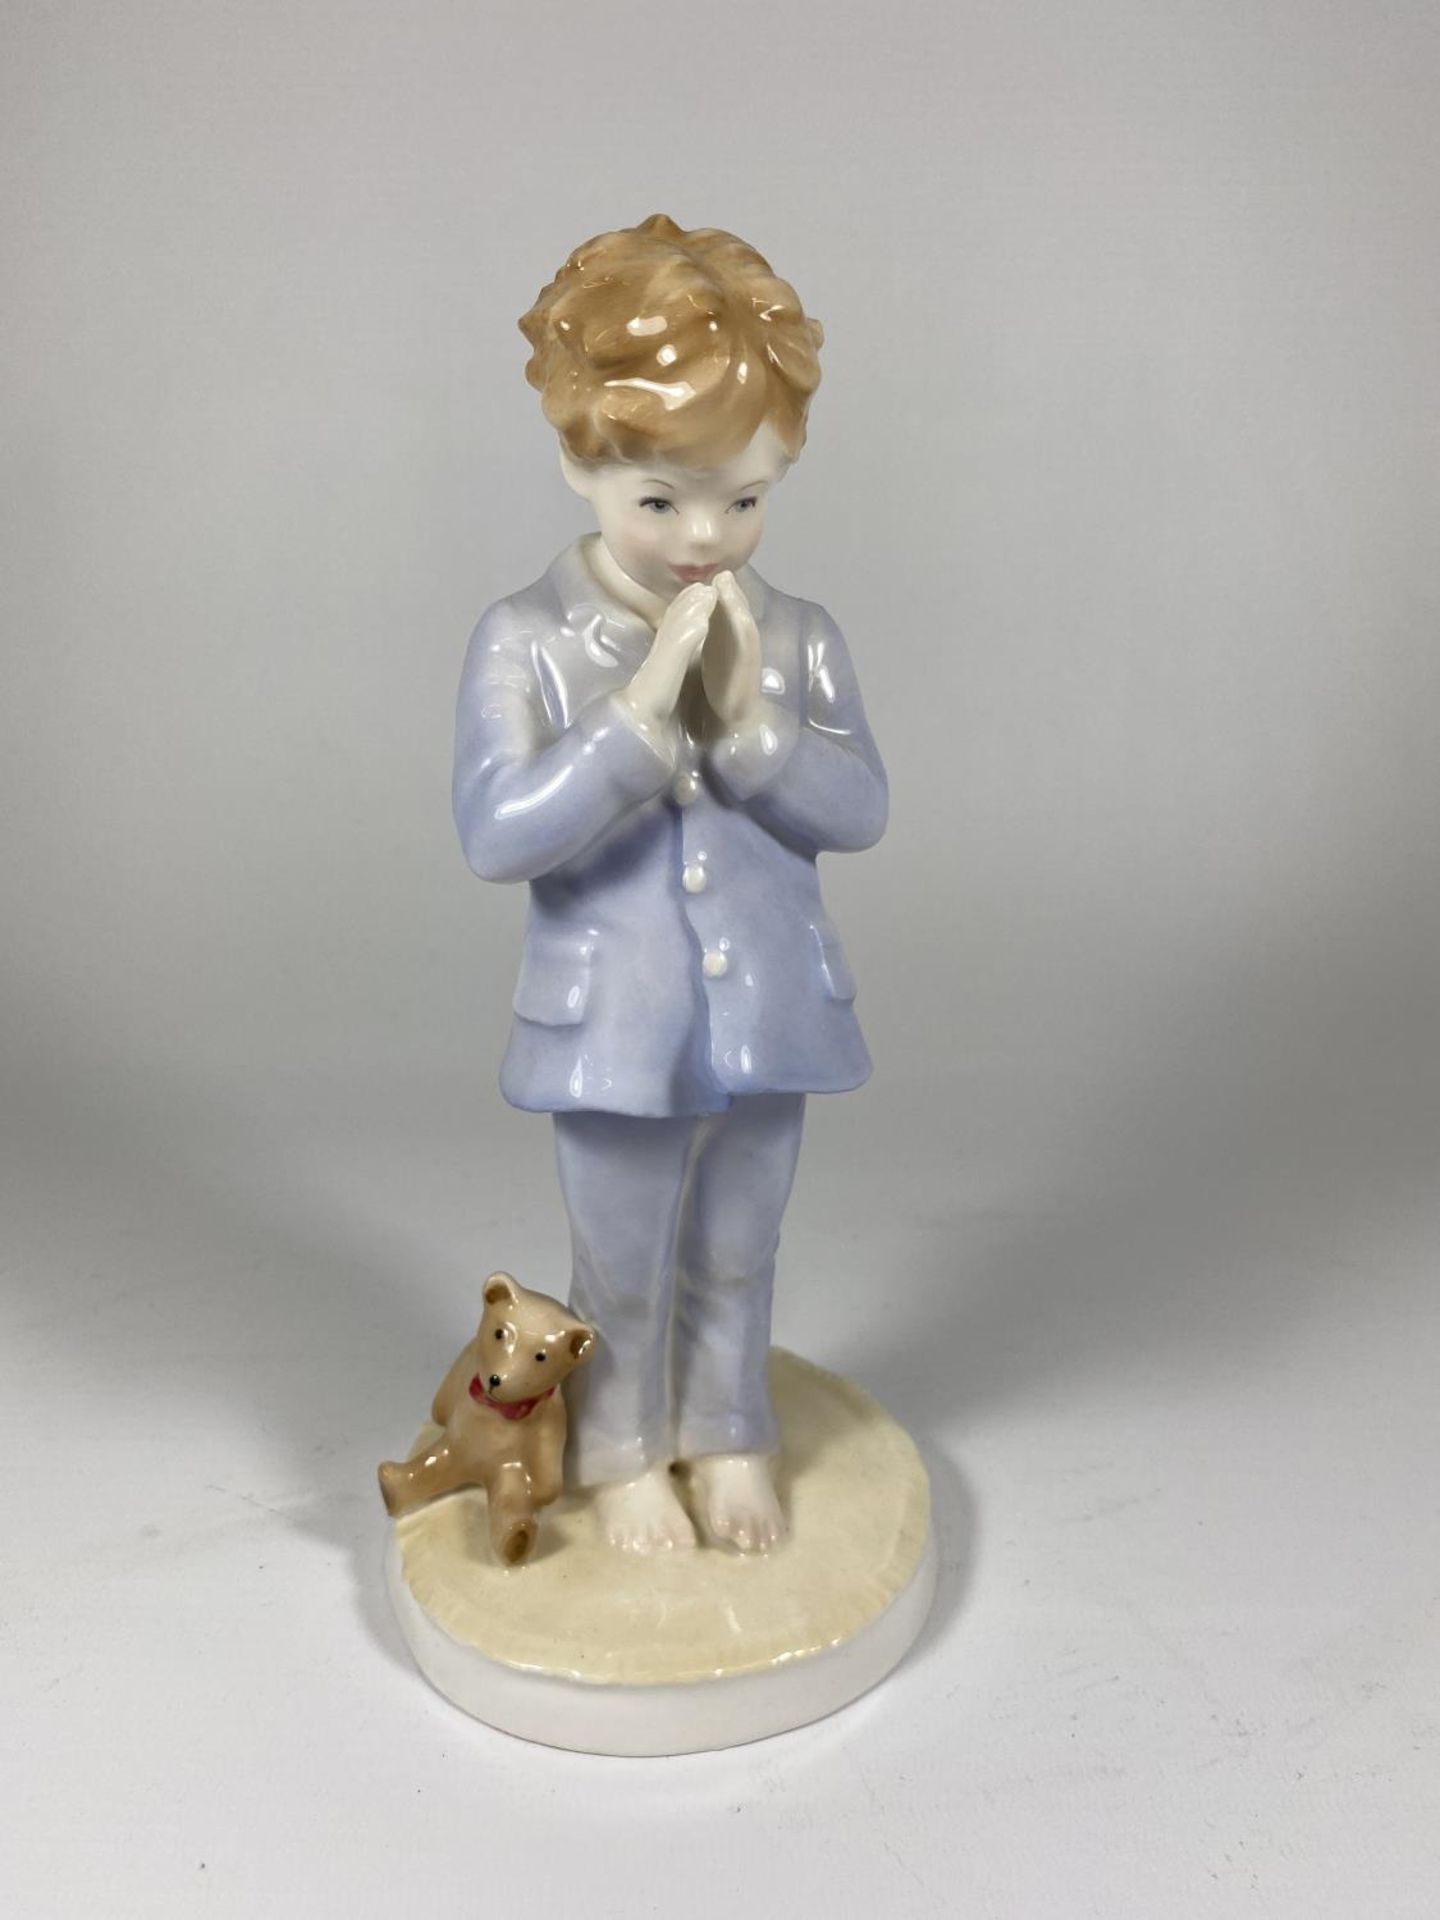 A ROYAL WORCESTER LIMITED EDITION MODEL OF A BOY - 'LUKE' NO. 1377/2000